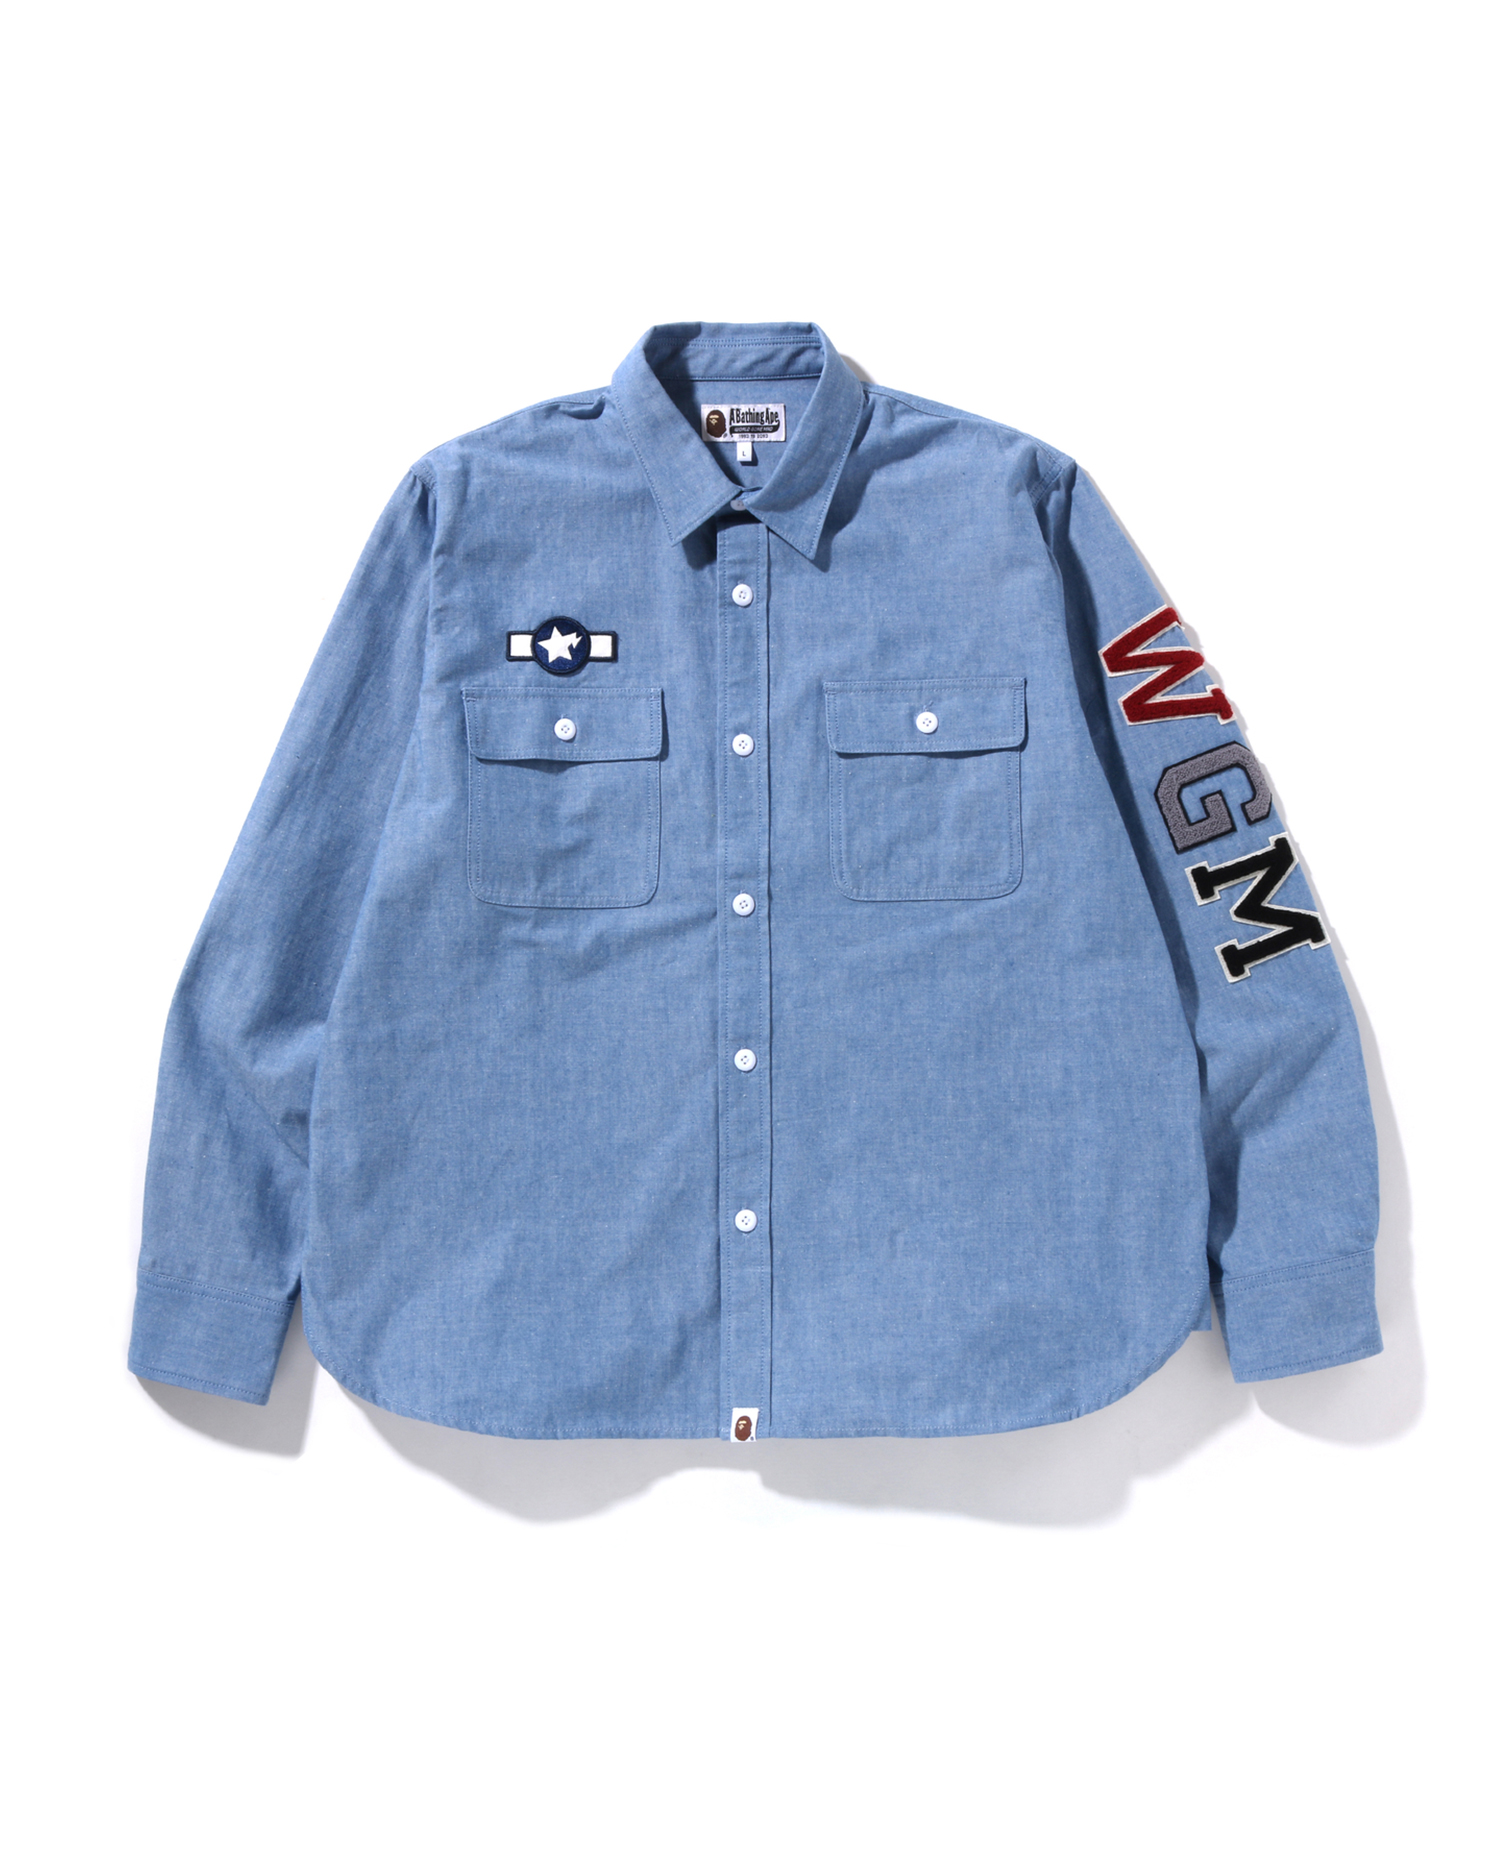 Shop Busy Shark Chambray Relaxed Fit Shirt Online | BAPE